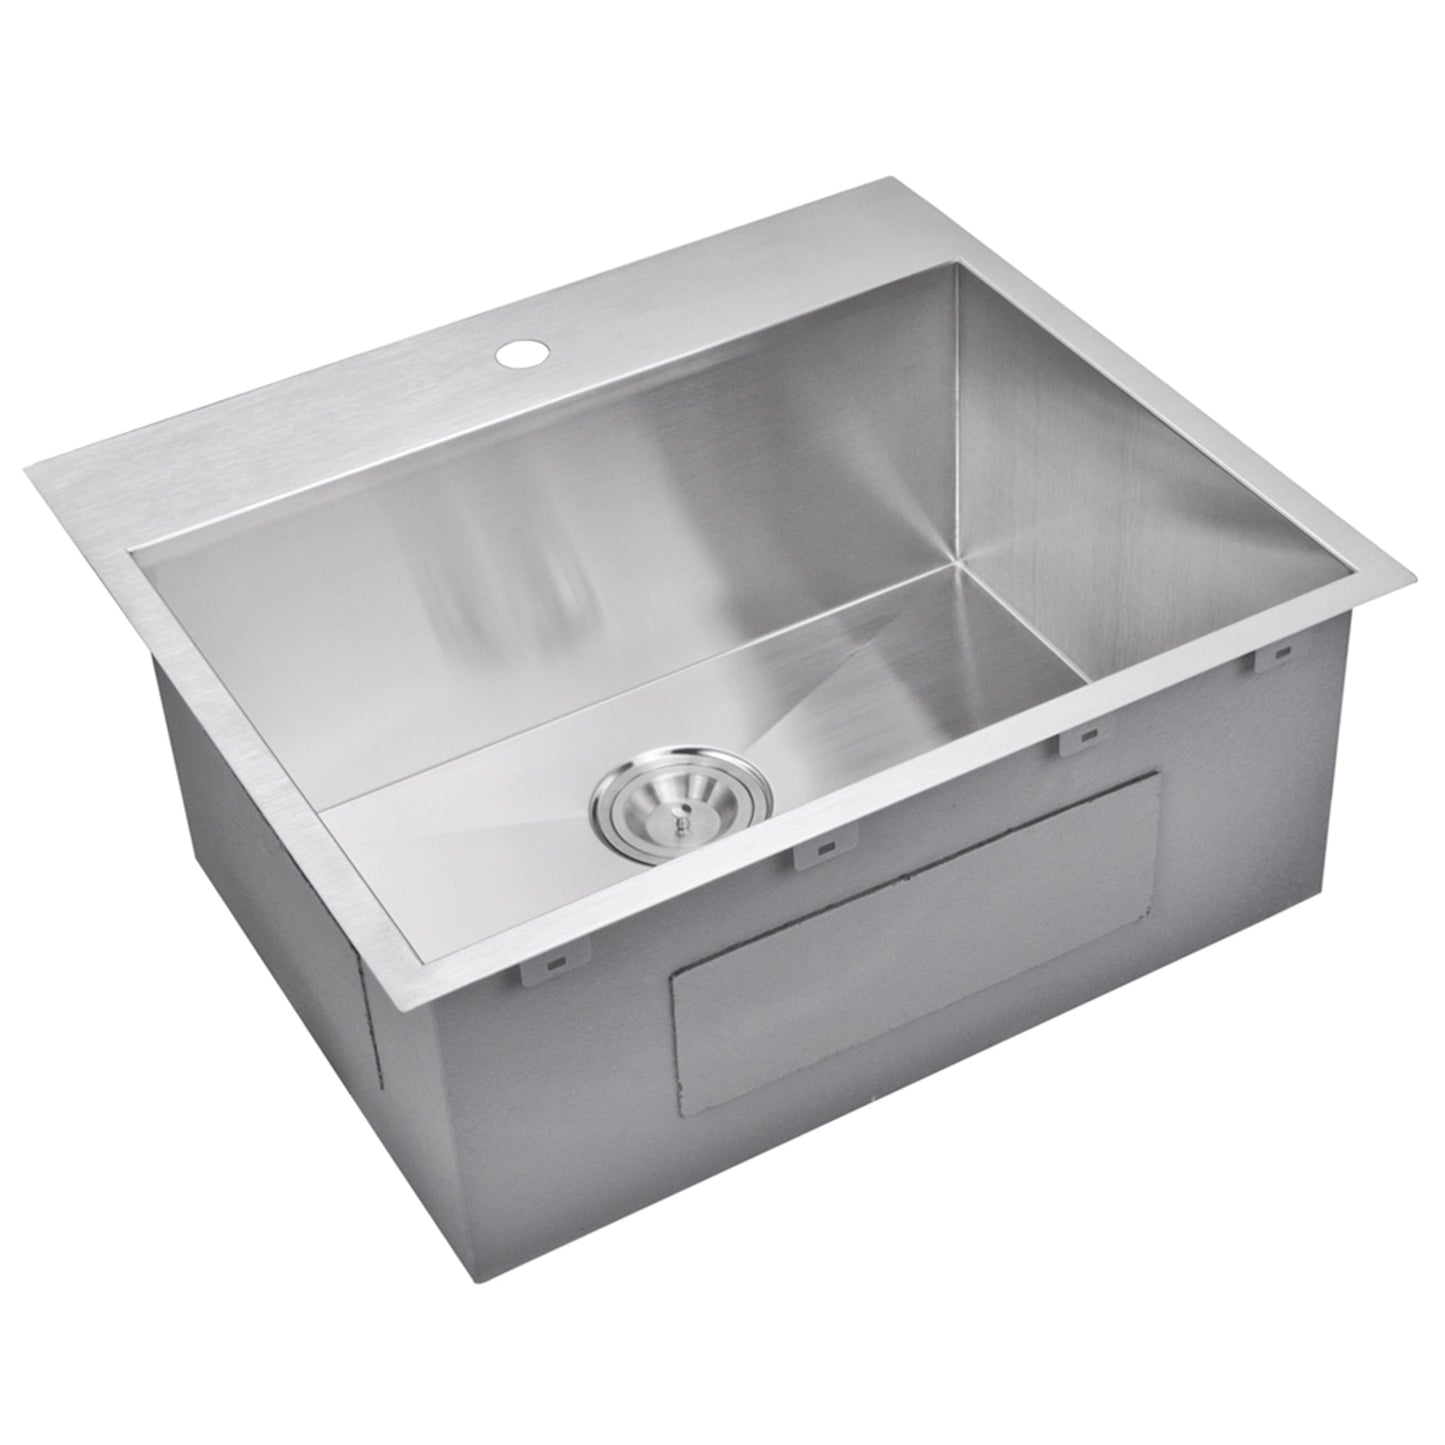 25 Inch X 22 Inch Zero Radius Single Bowl Stainless Steel Hand Made Drop In Kitchen Sink With Drain and Strainer